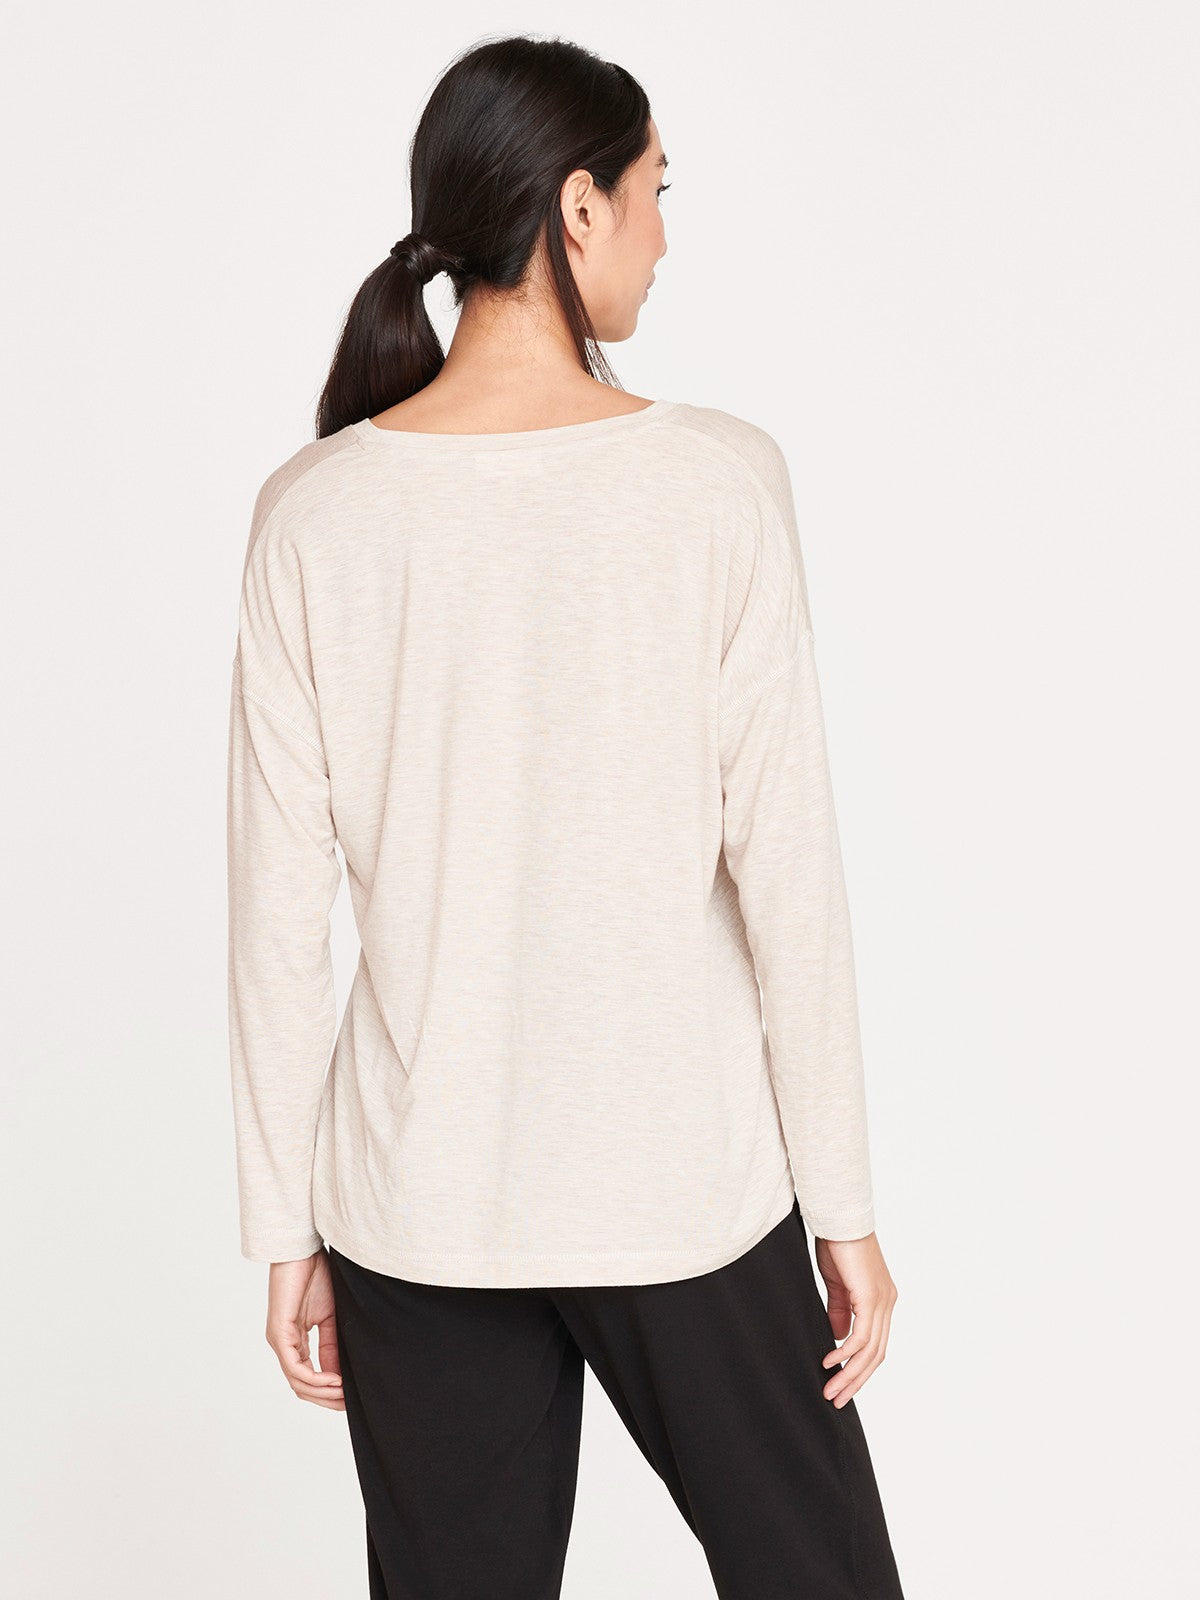 Naturally Soft SeaCell™ Long Sleeve Top in Cream